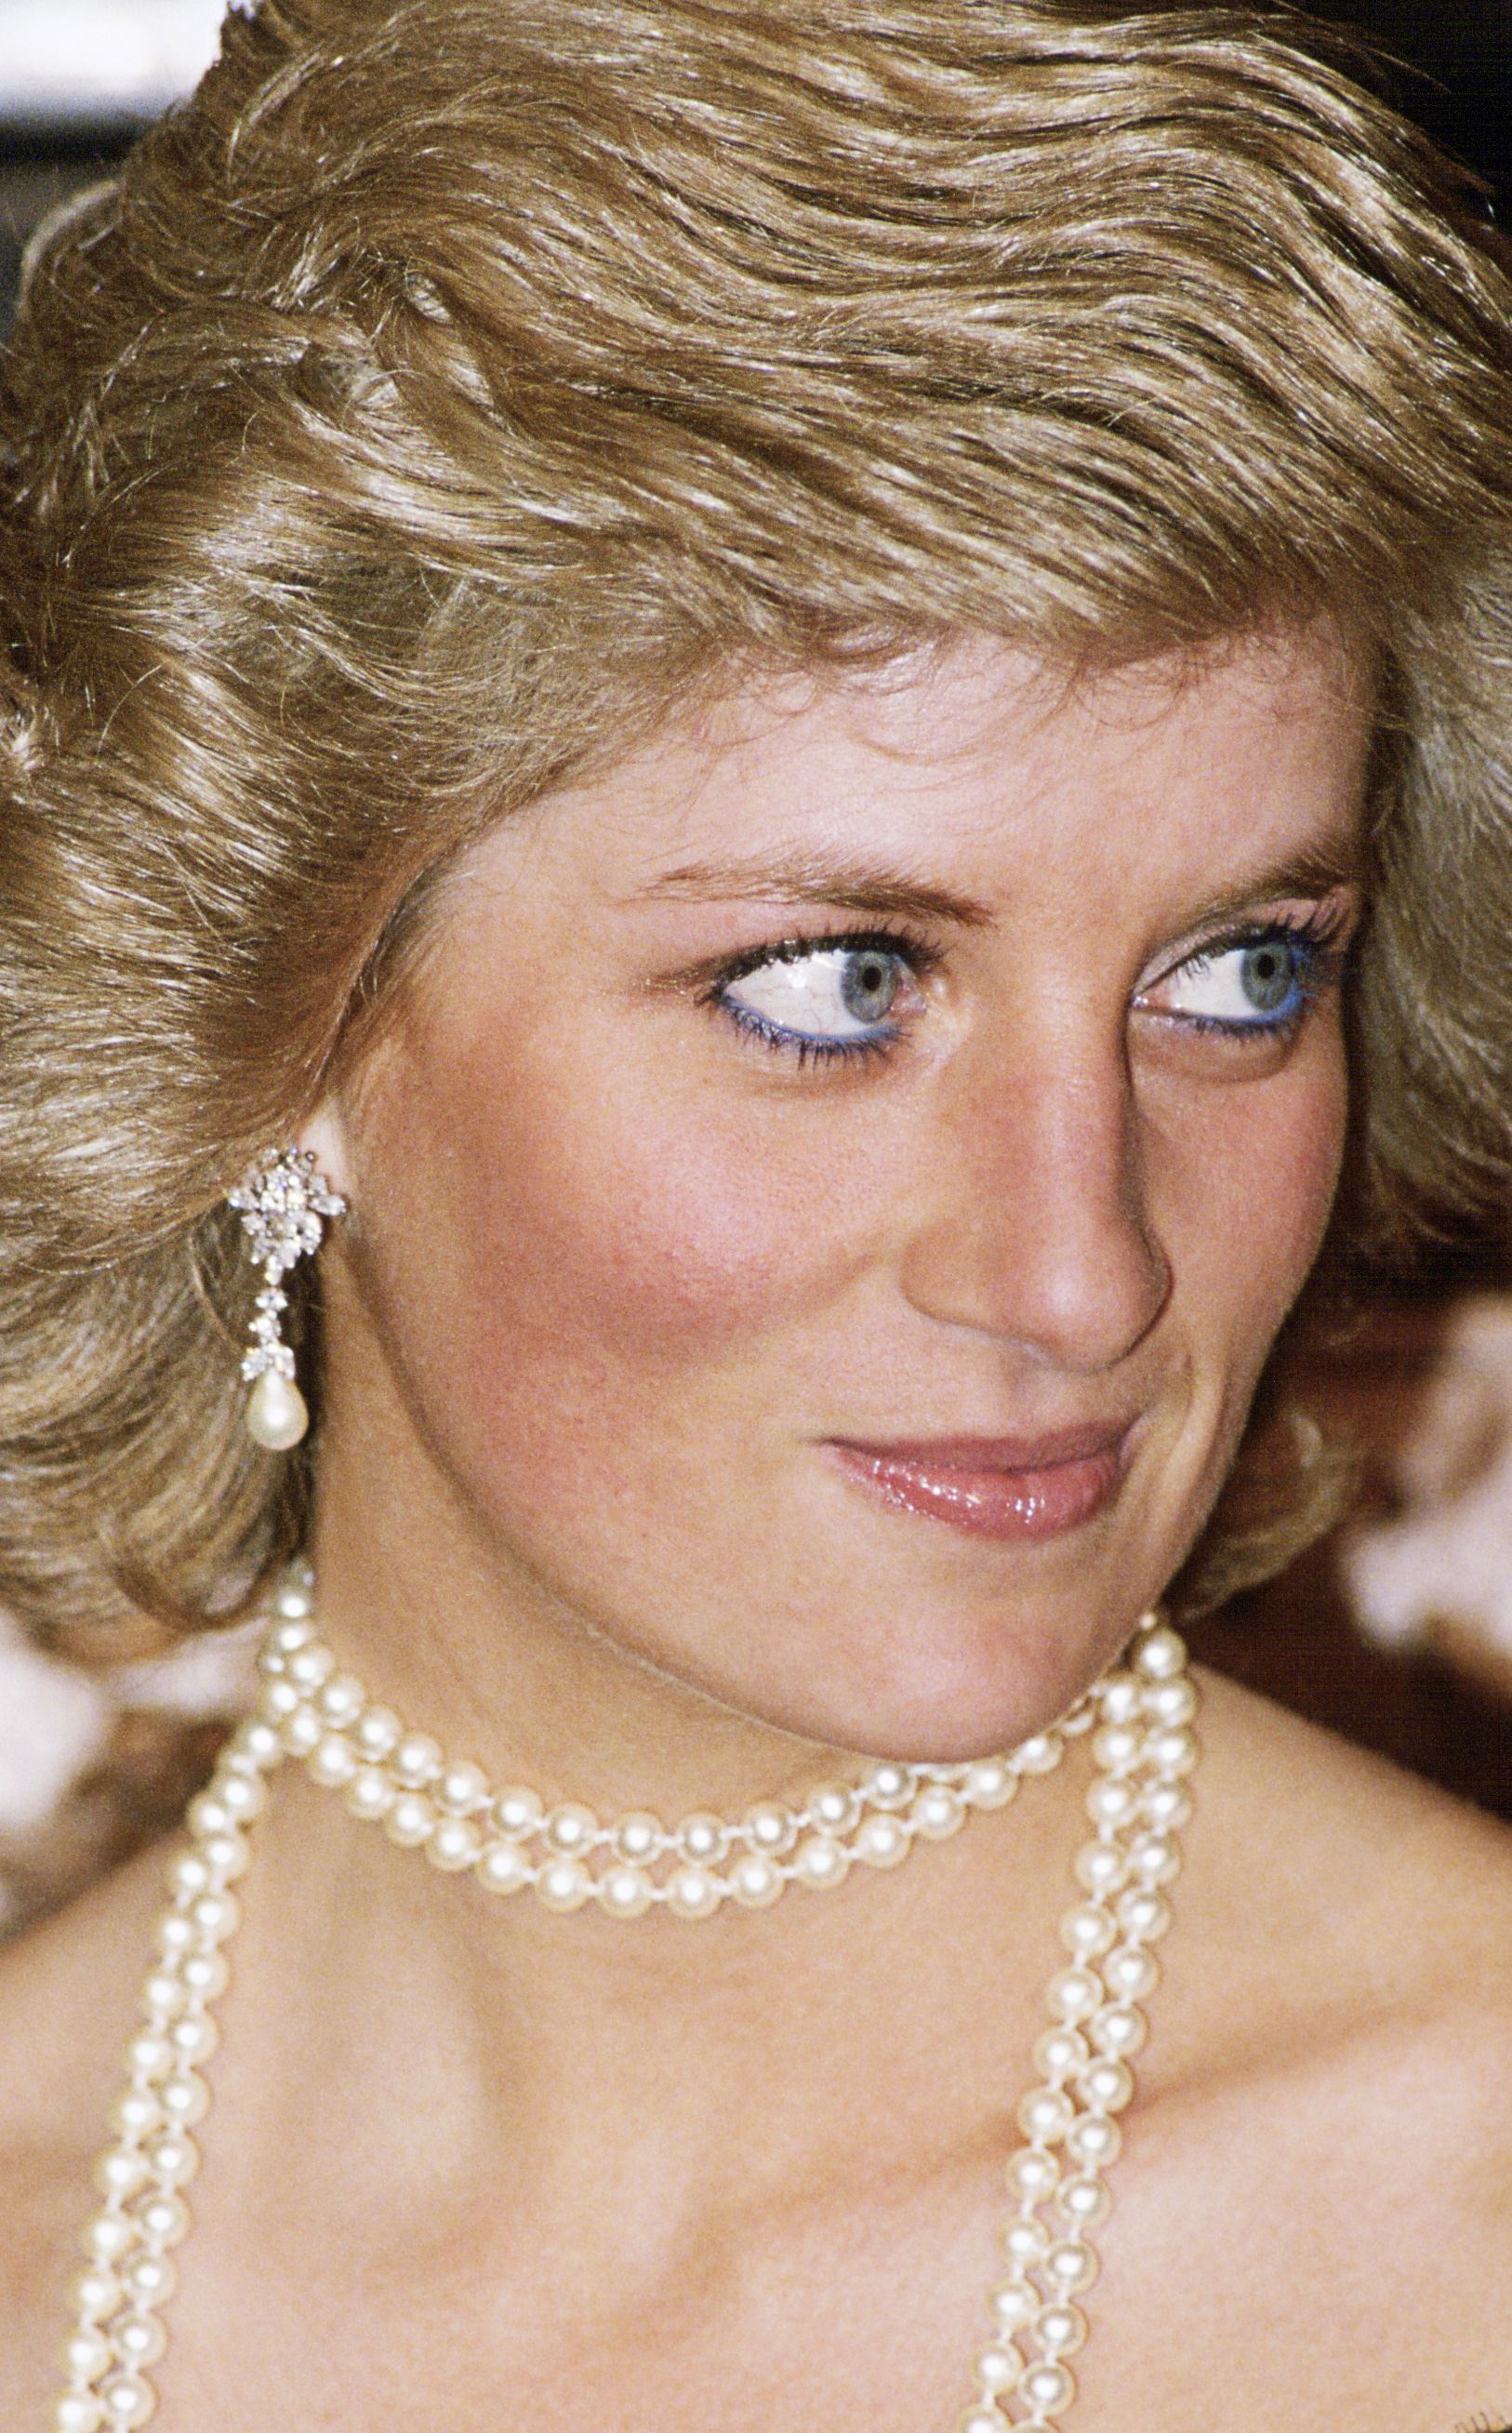 Details more than 77 princess diana pearl necklace best - POPPY